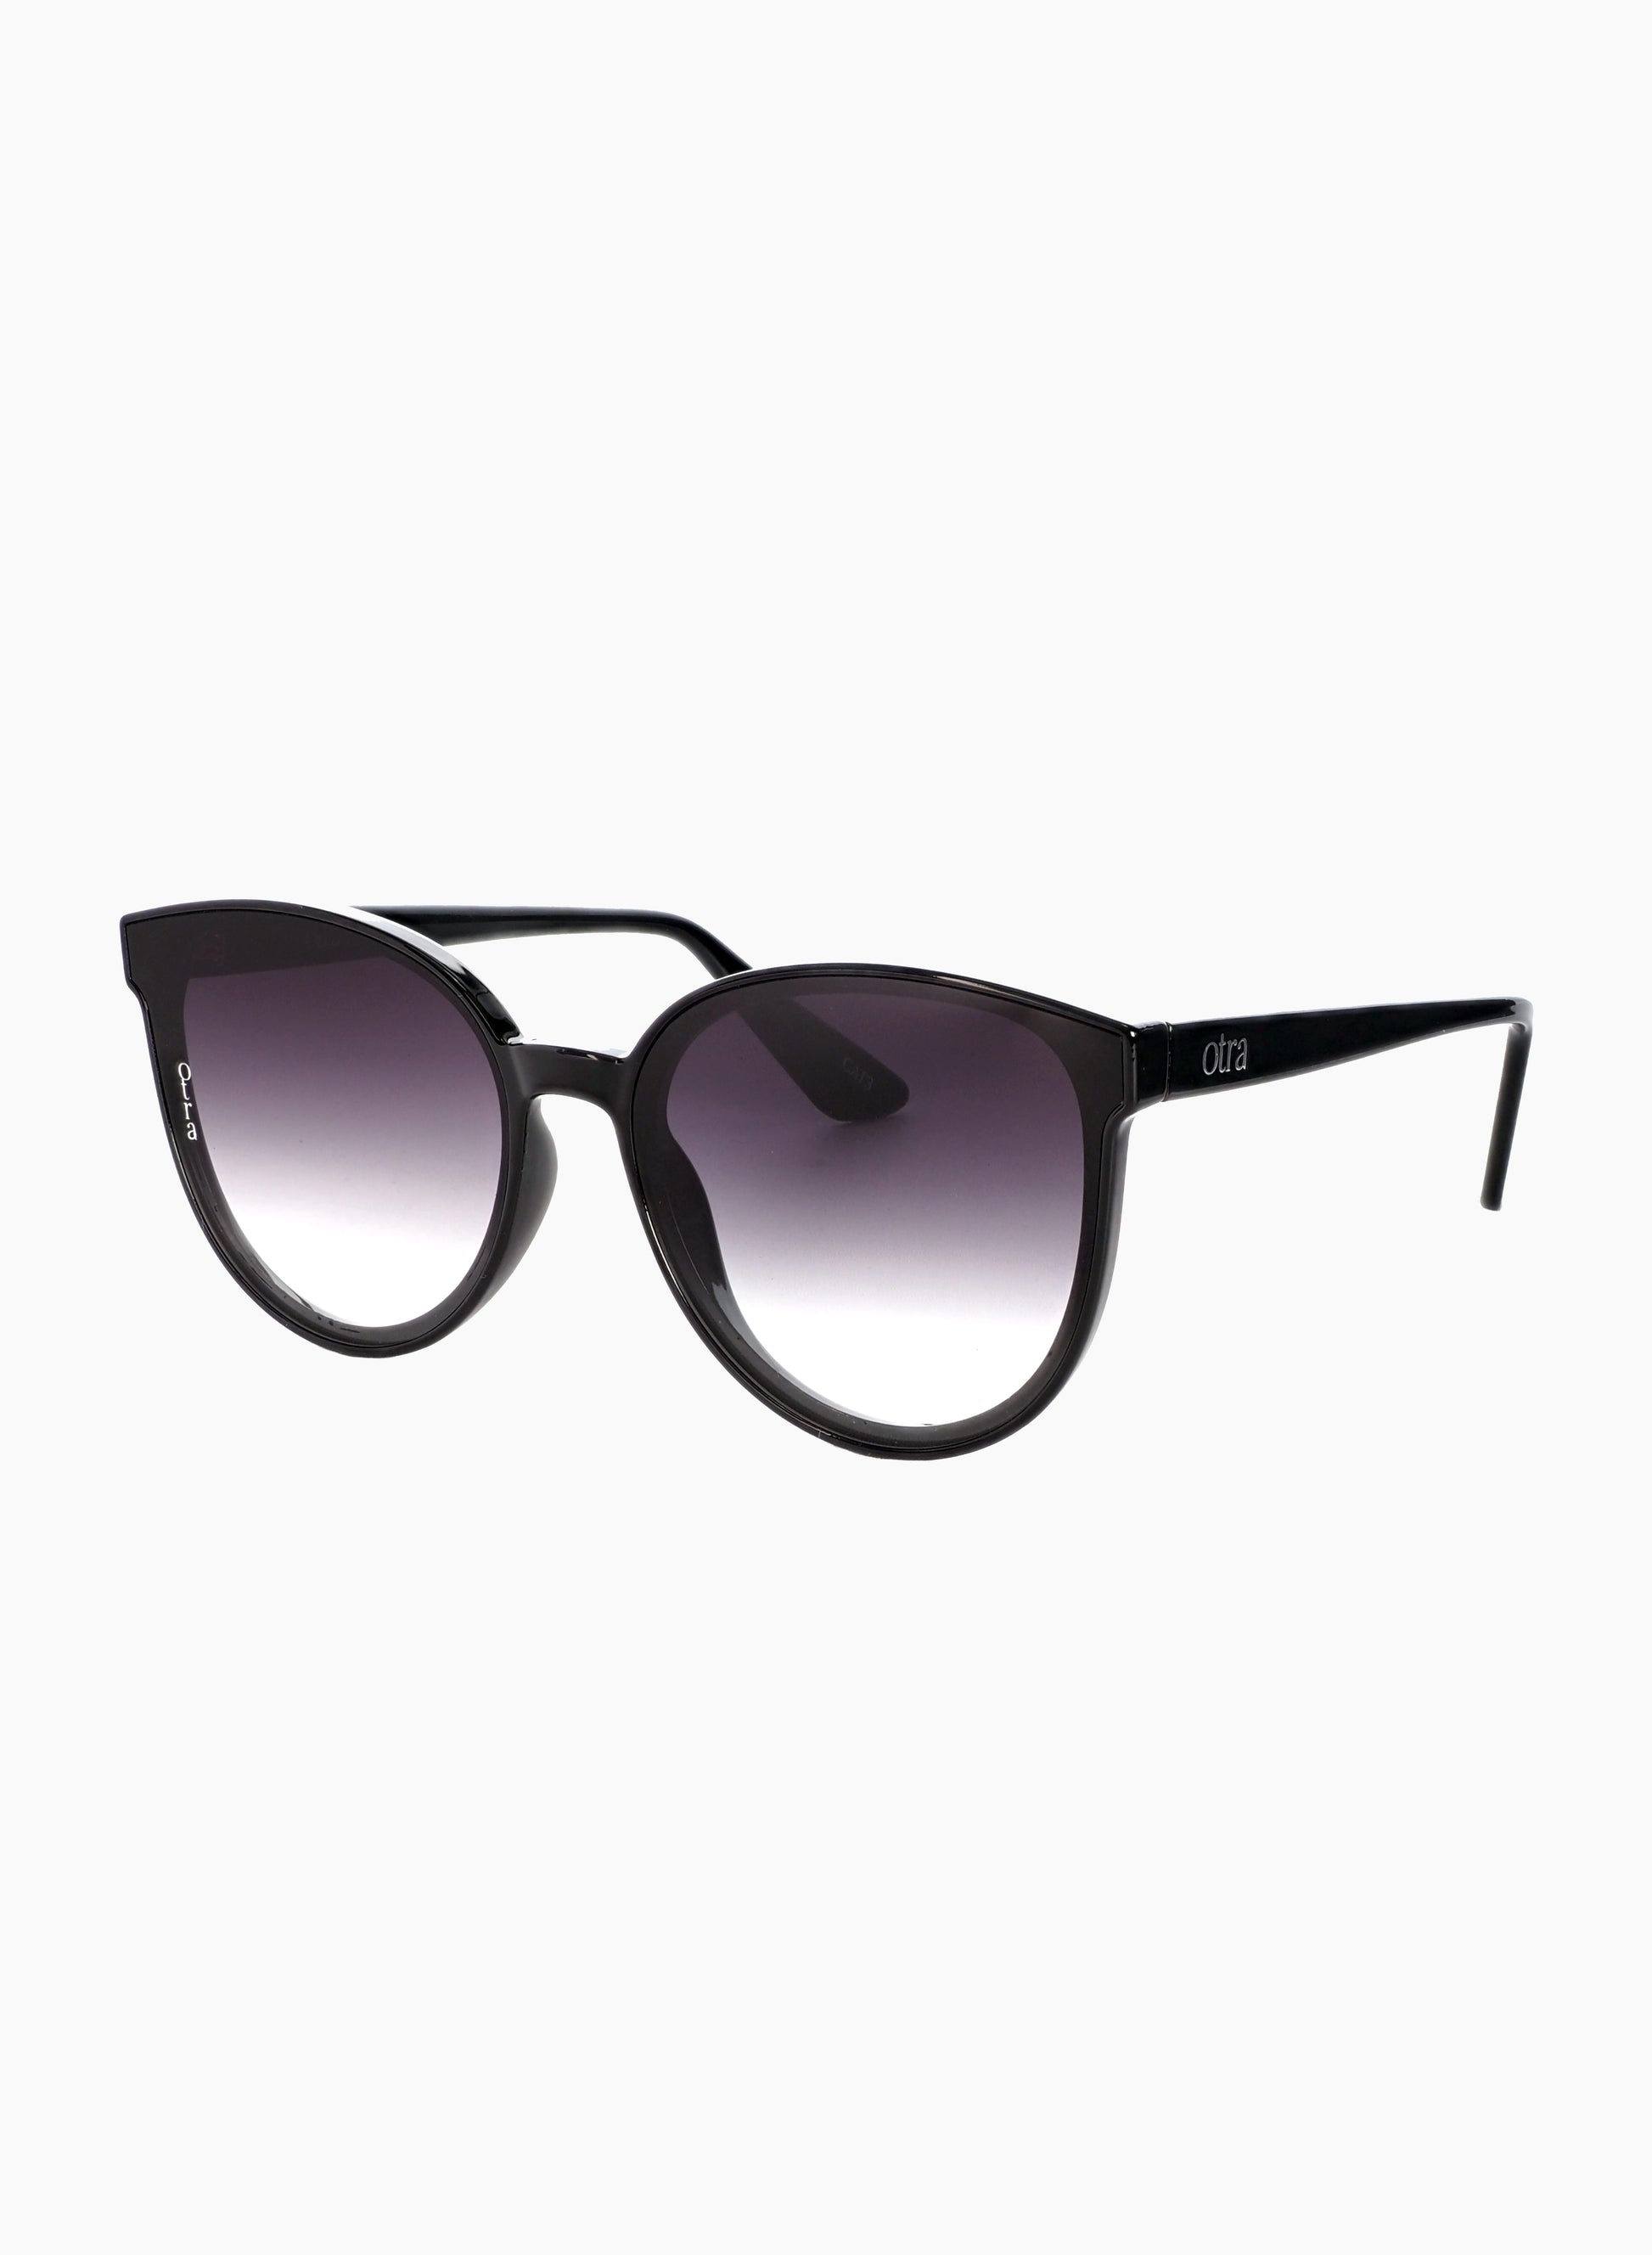 Side view of Dali oversized round sunglasses in black